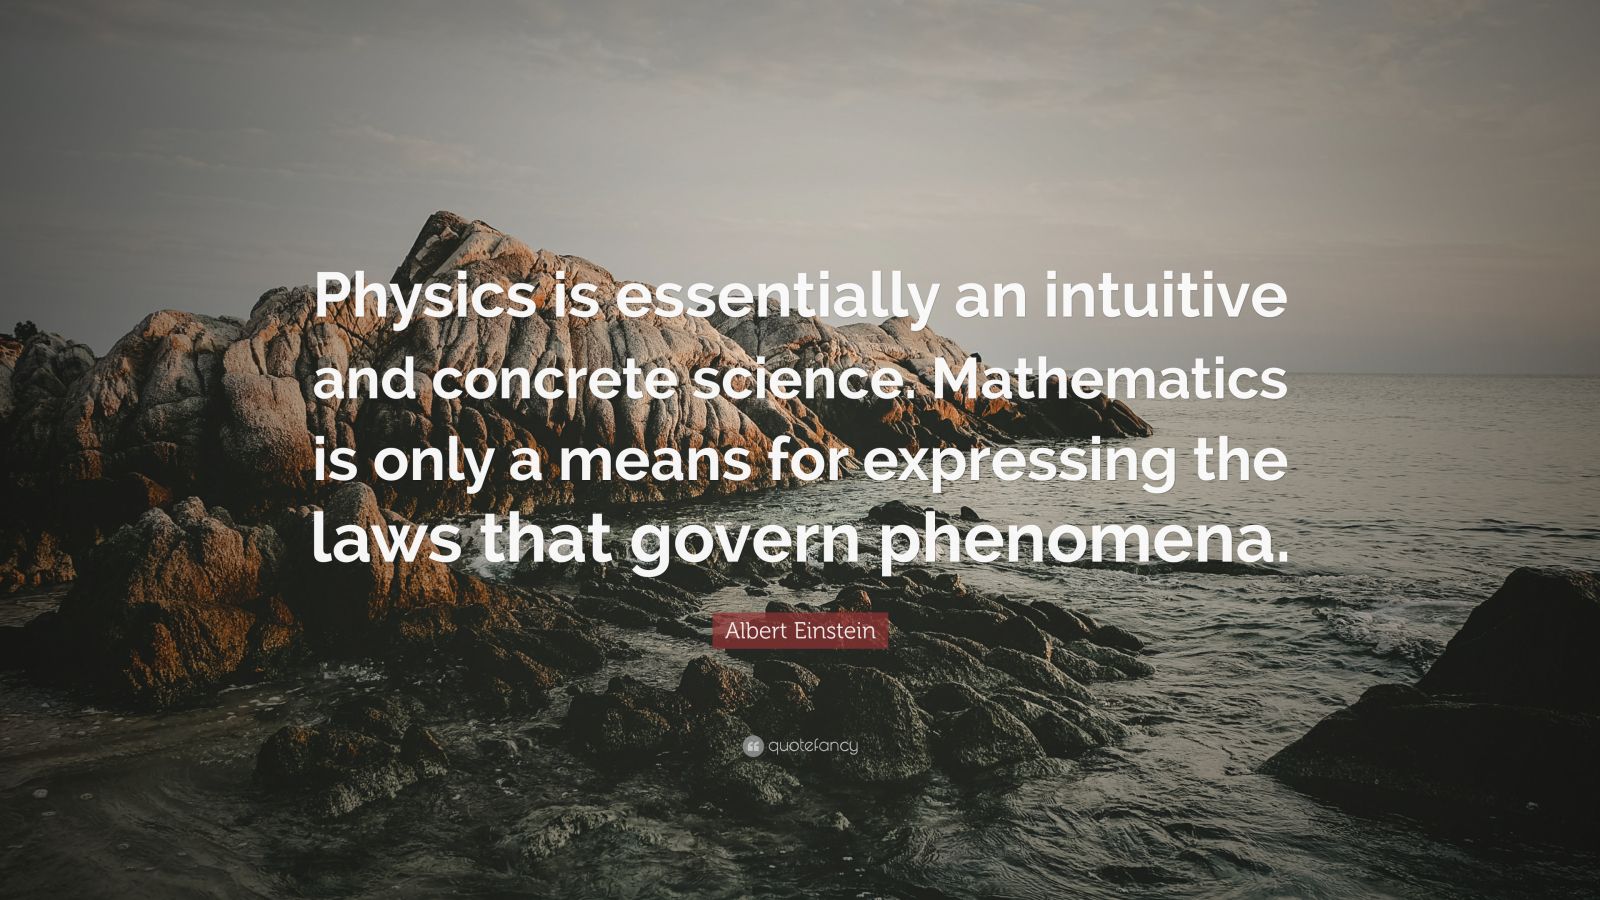 Albert Einstein Quote: “Physics is essentially an intuitive and